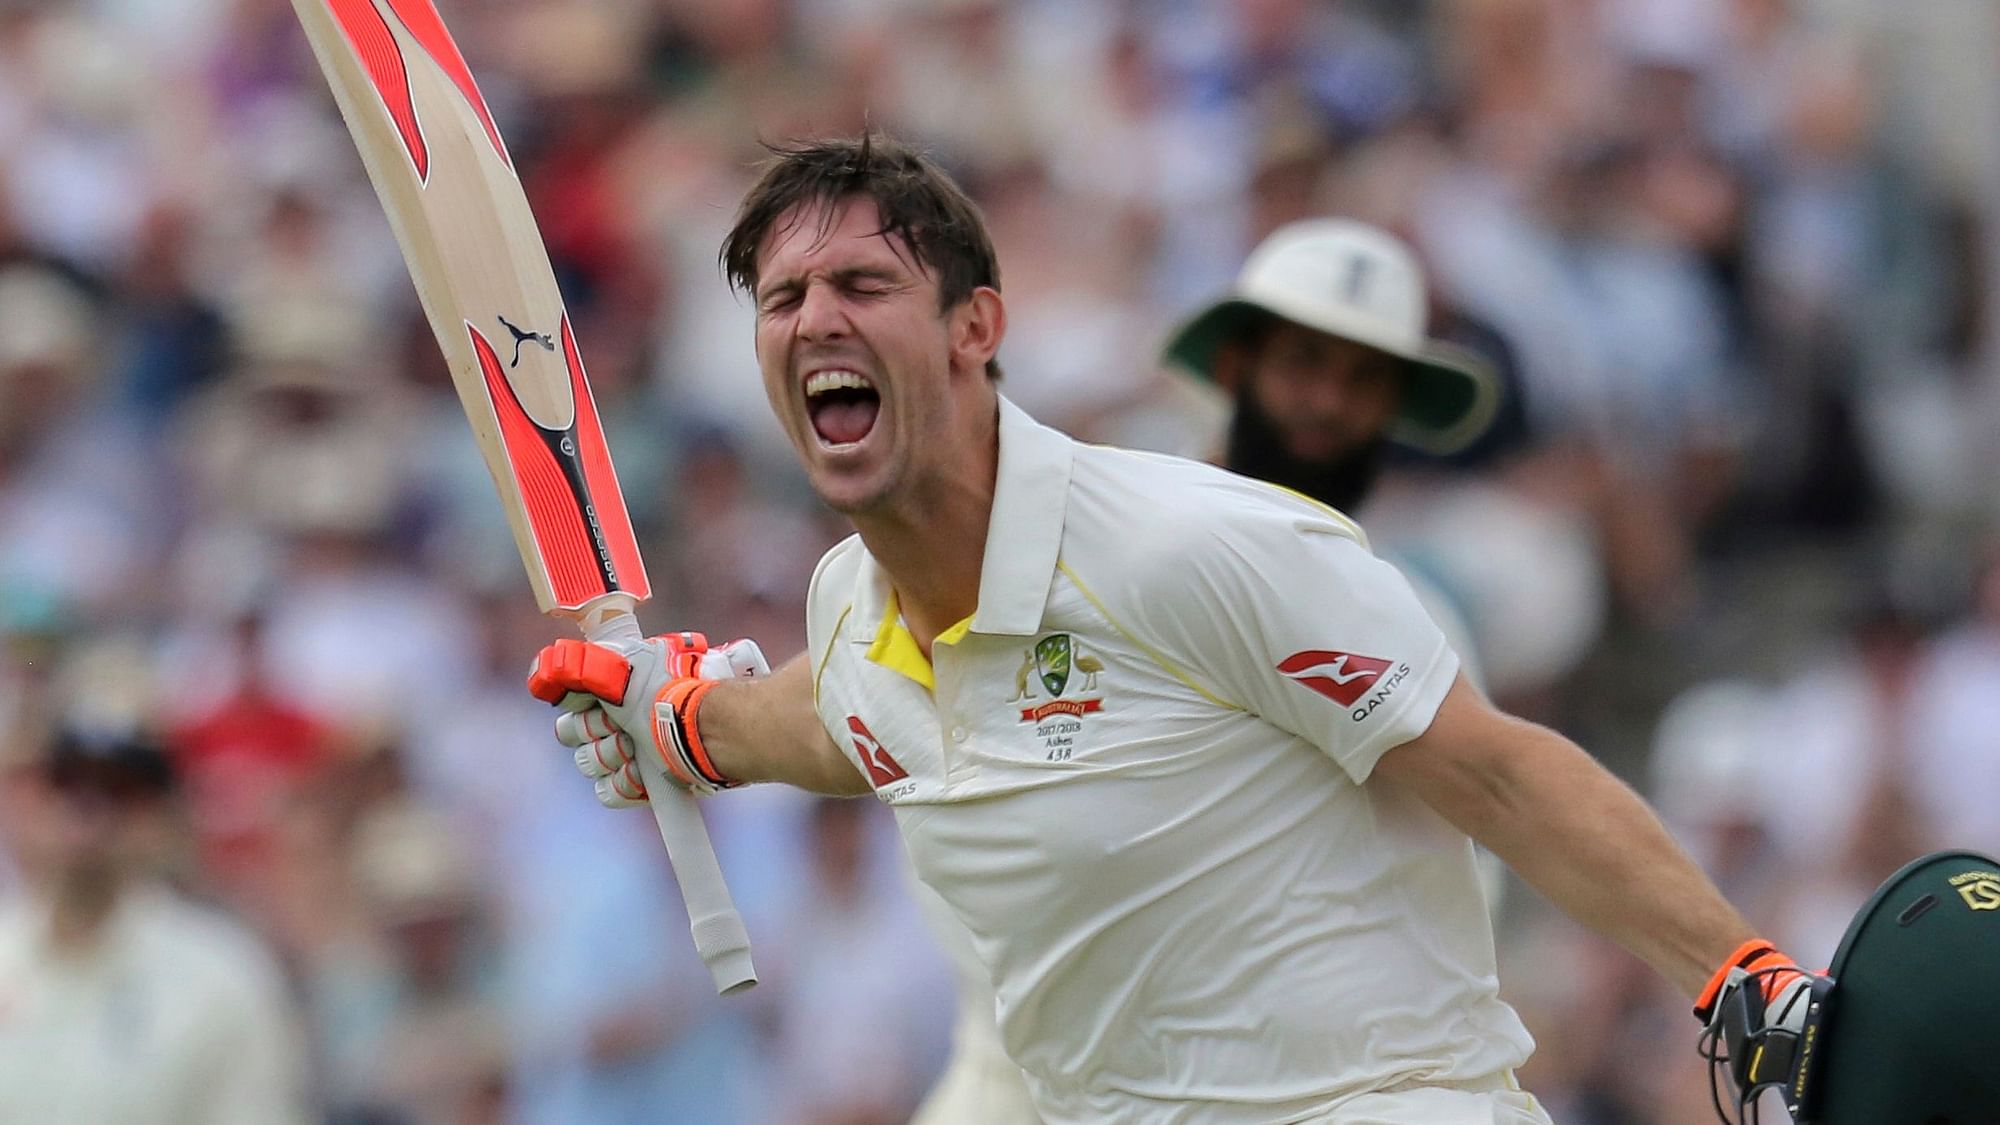 Mitchell Marsh is set to miss the opening Test against Pakistan after fracturing his right hand punching a wall.